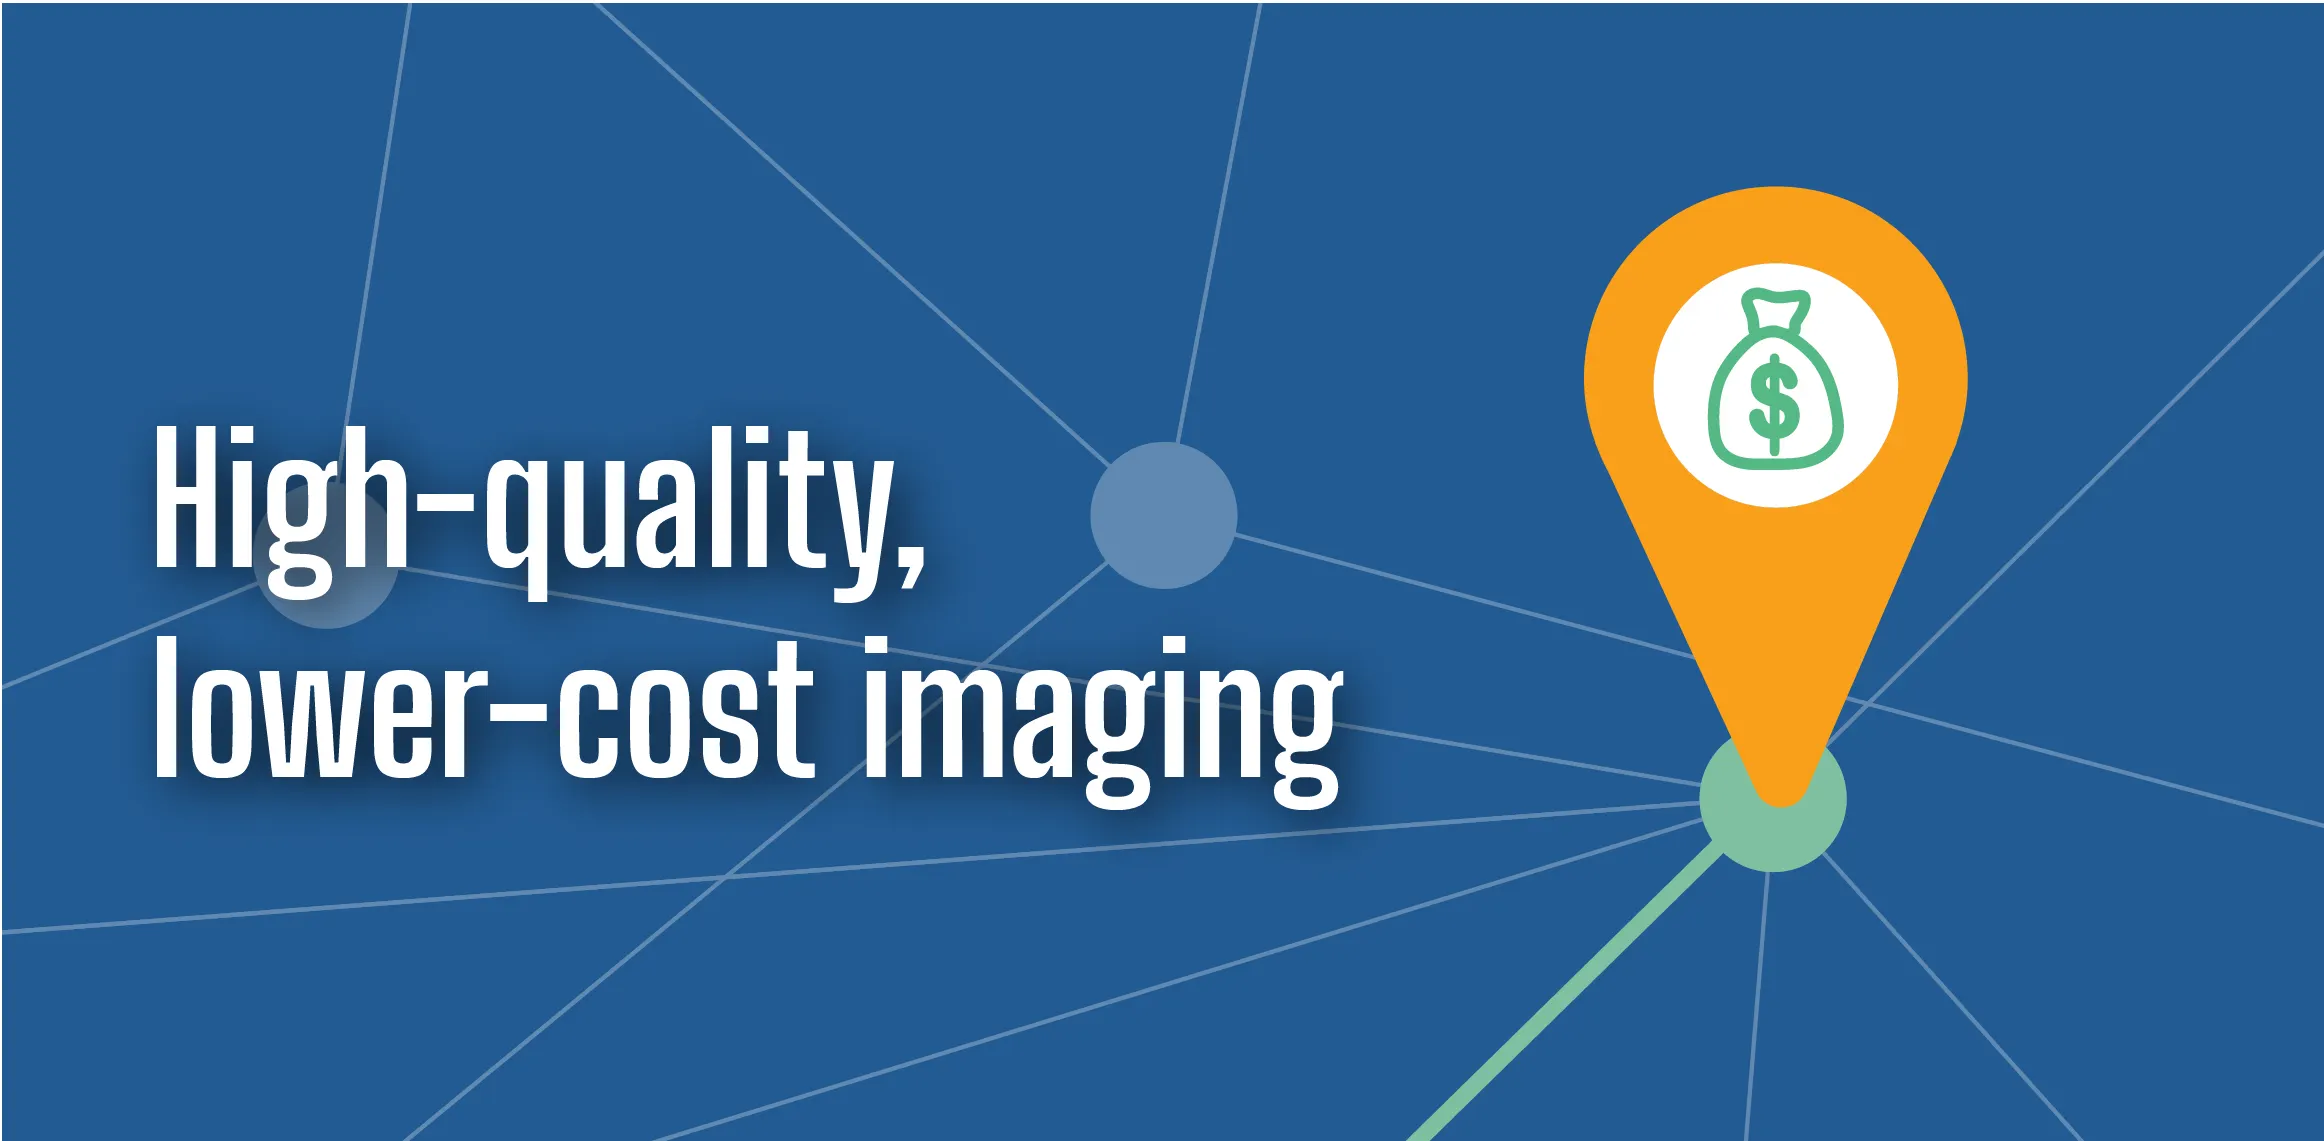 Delaware High-quality, lower-cost Imaging